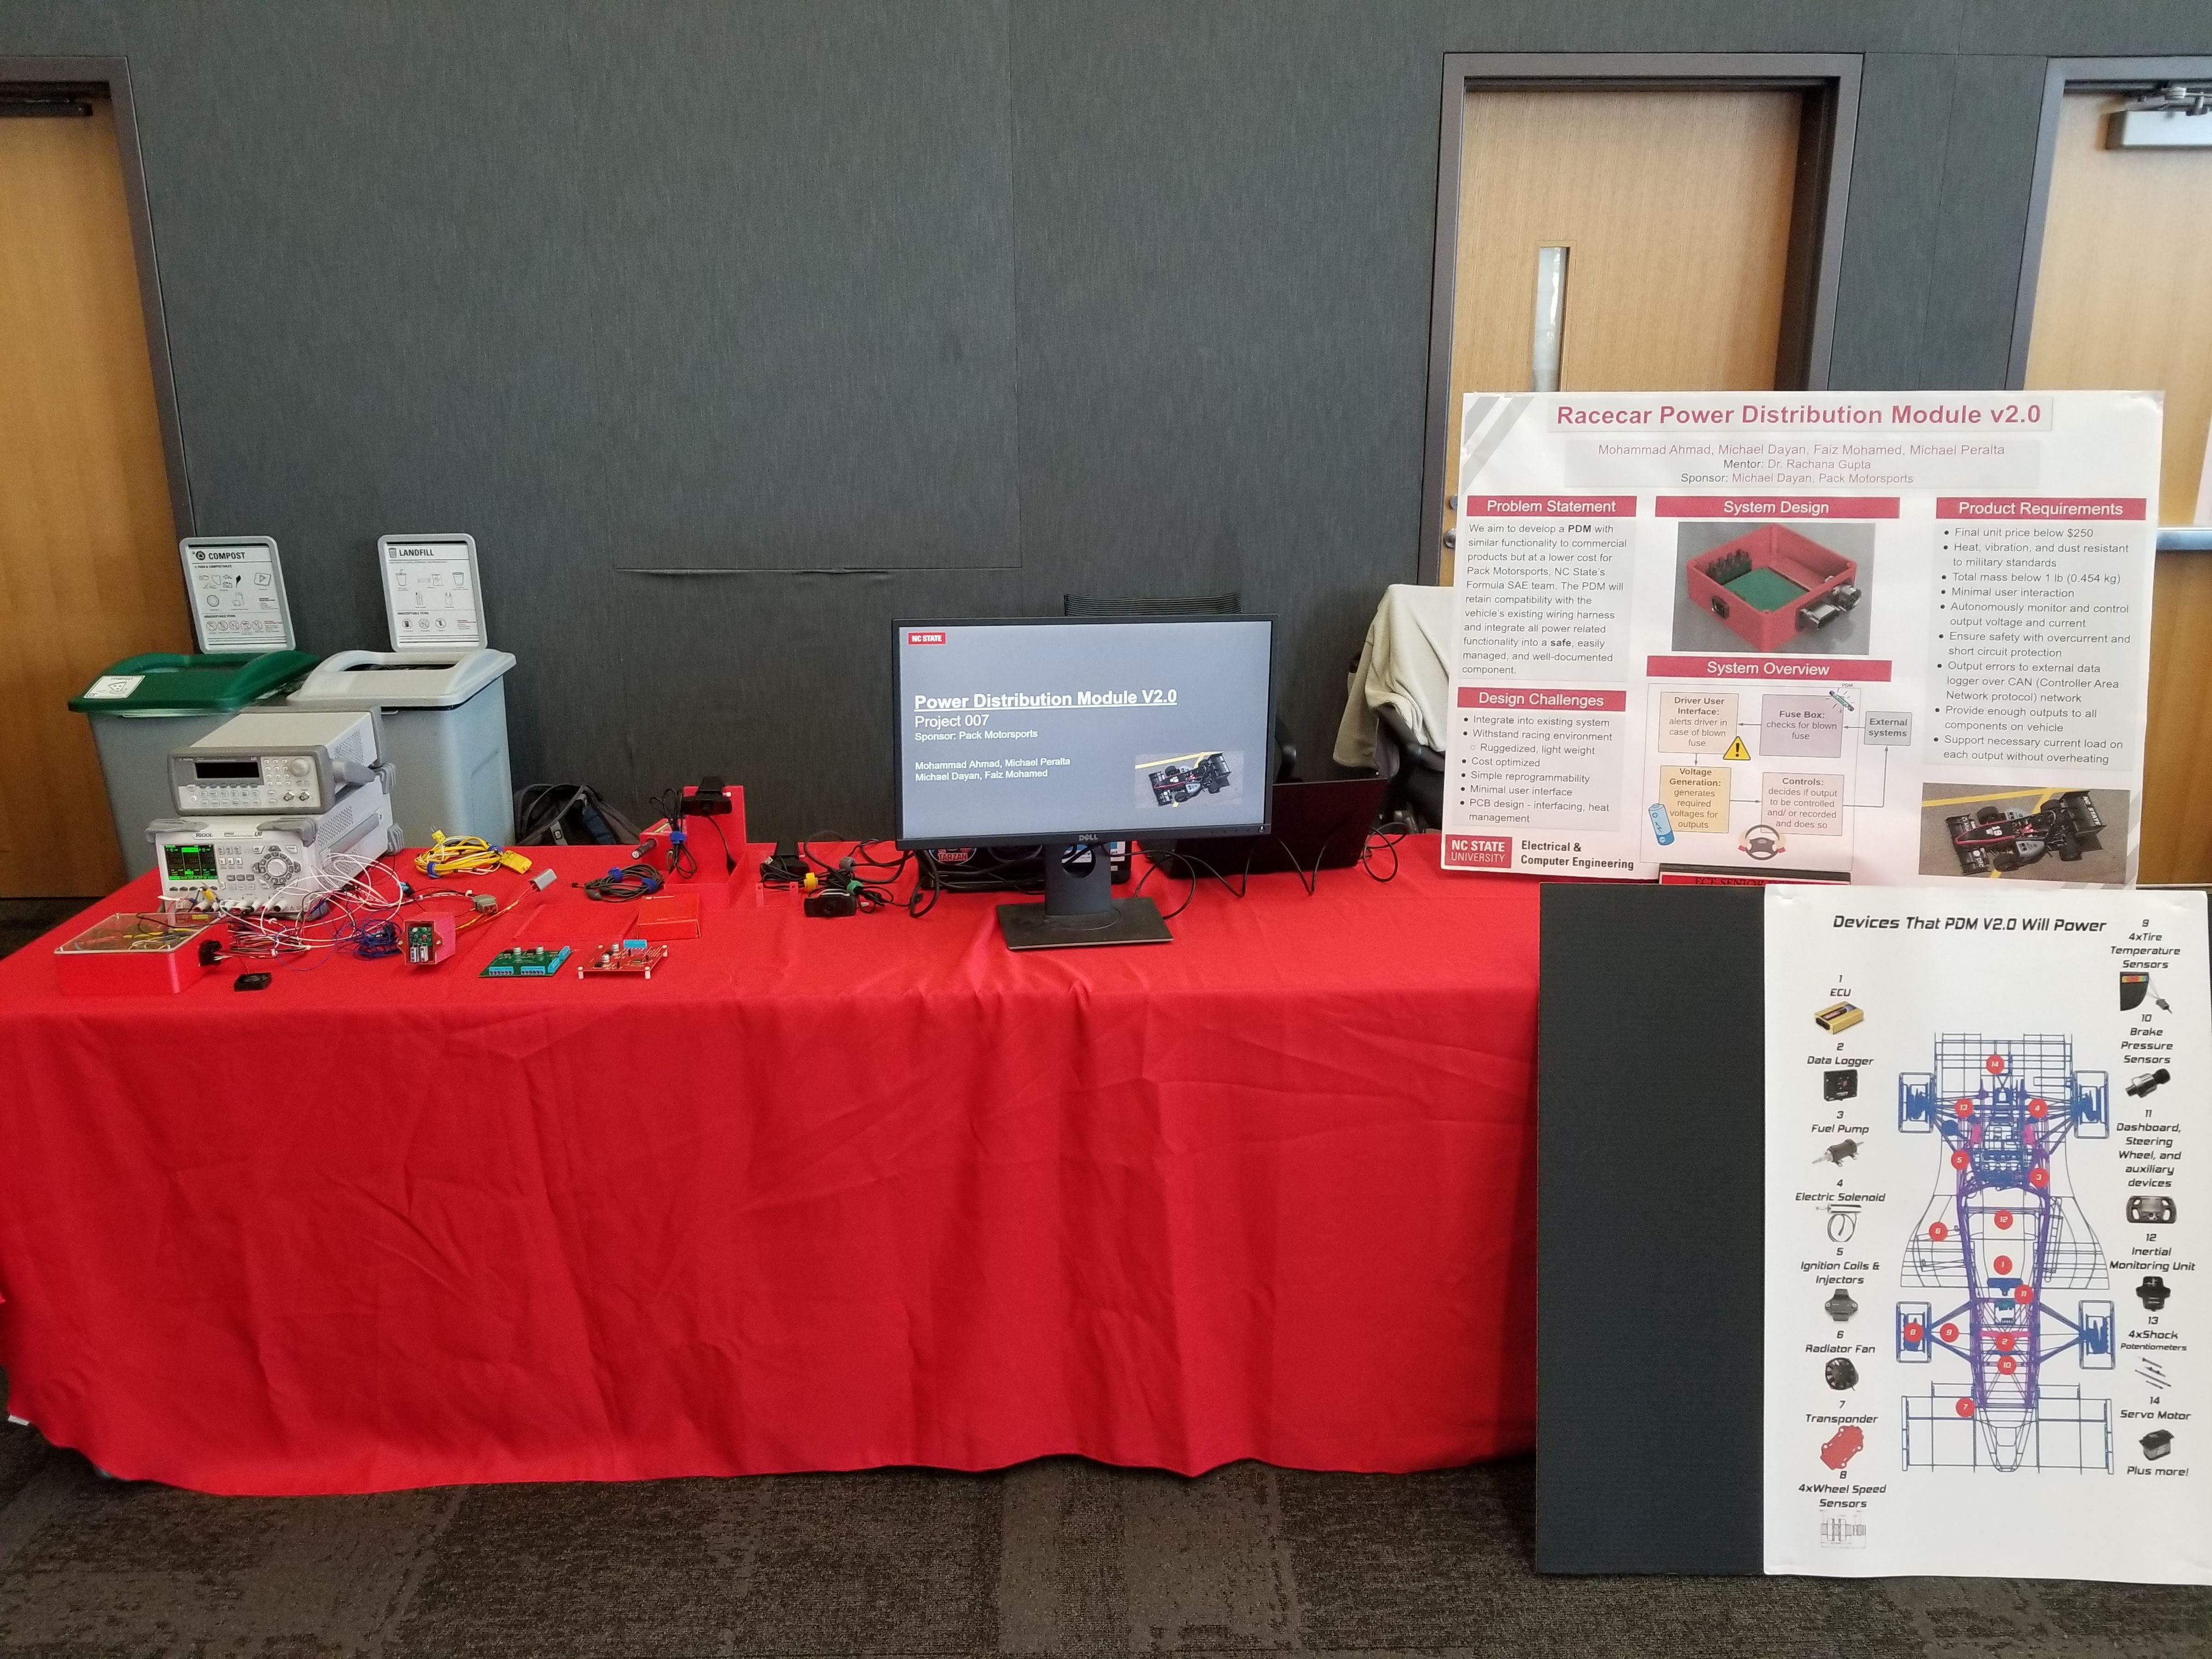 Picture of the display my group had on design day. On the left is the power distribution module